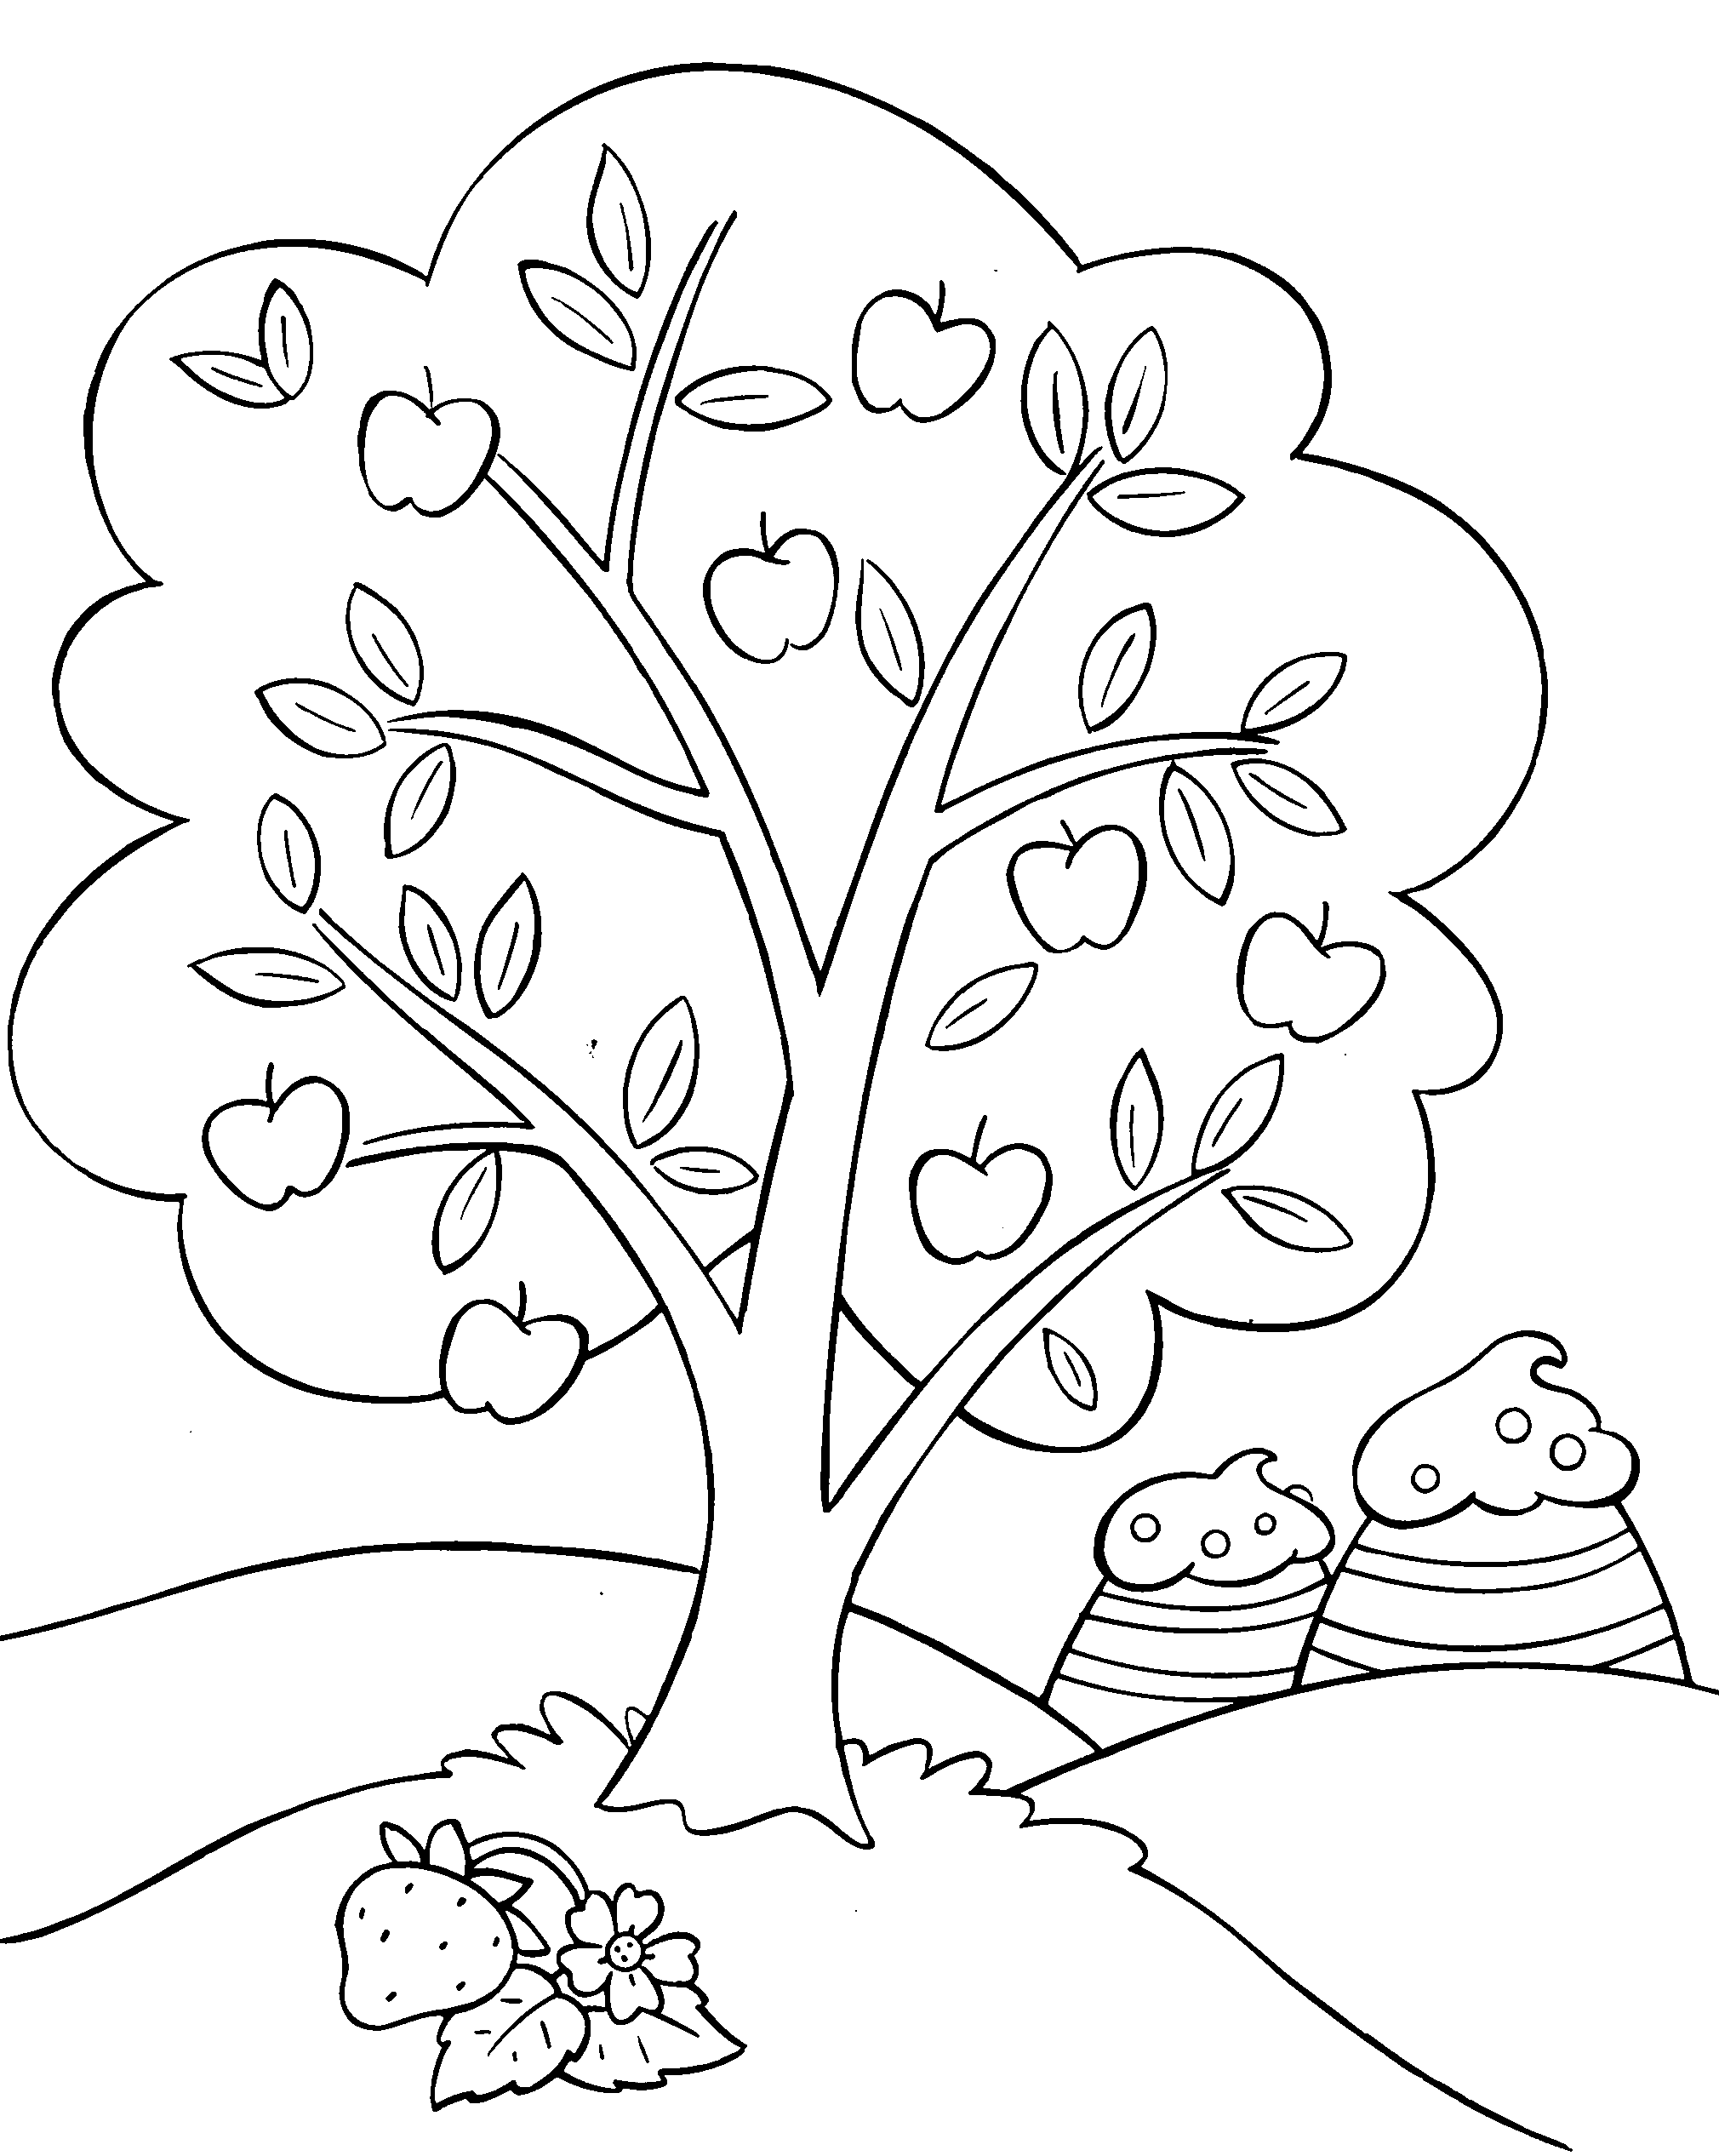 Online Colouring Pictures 3